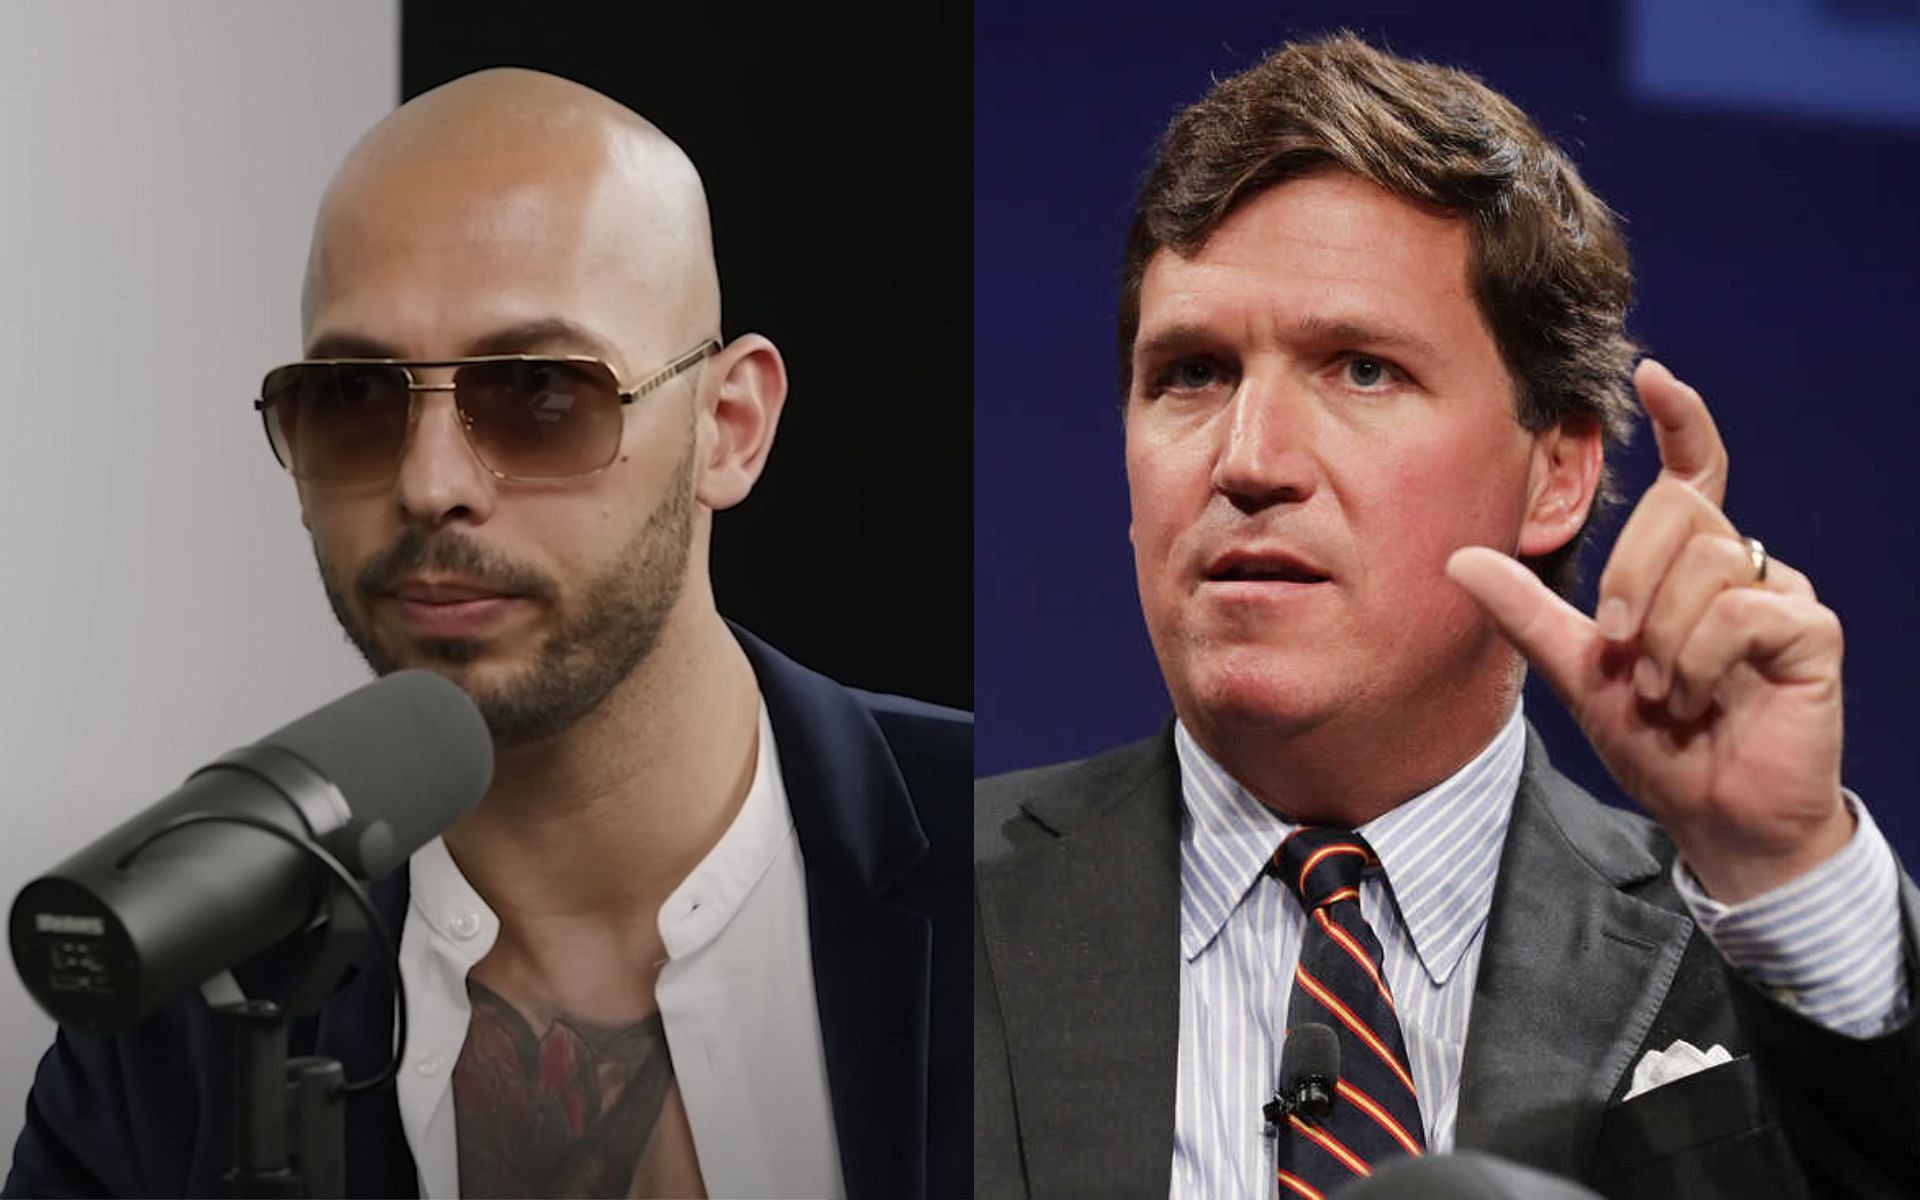 Andrew Tate (left) and Tucker Carlson (right). [Images courtesy: left image from Twitter @PopBase]